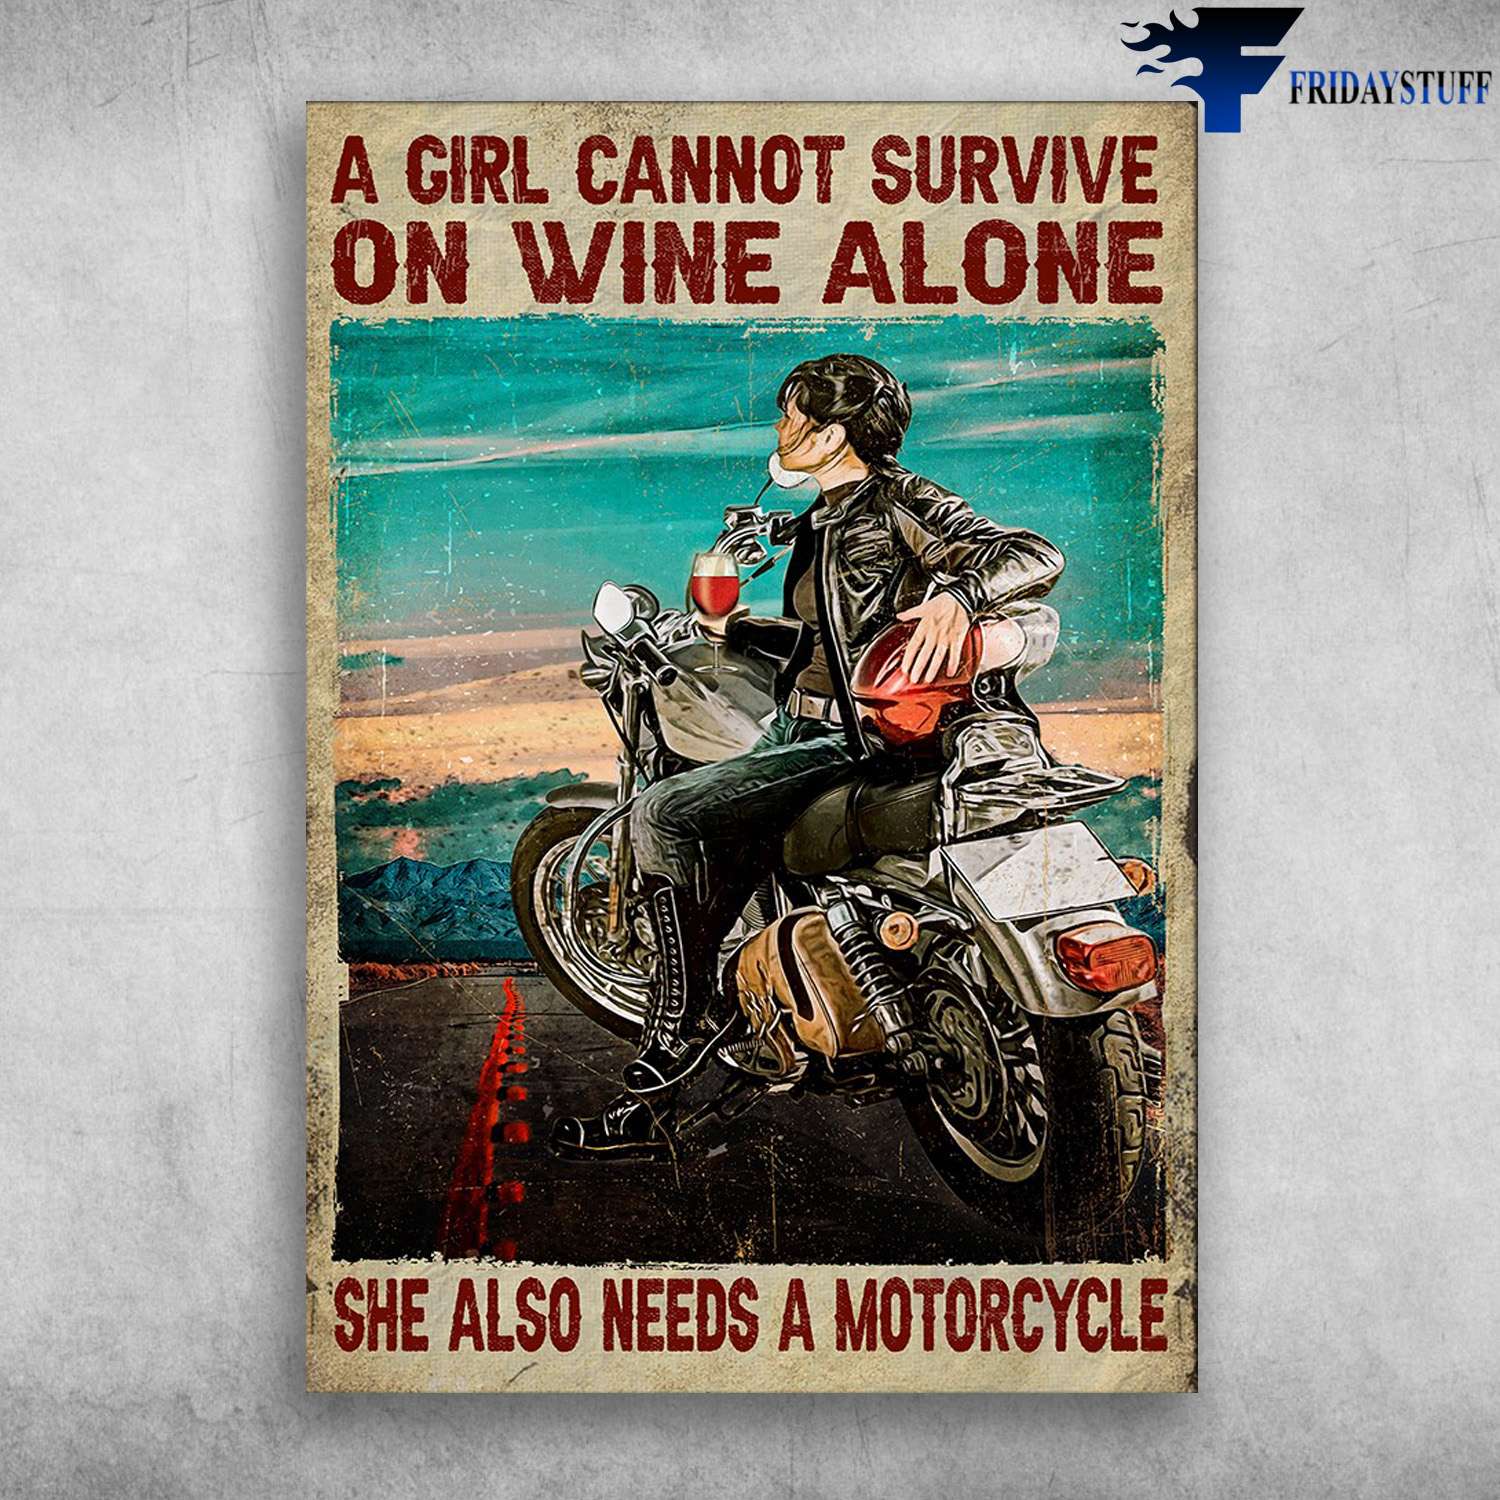 Riding With Wine, Motorcycle Biker - A Girl Cannot Survive On Wine Alone, She Also Needs A Motorcycle